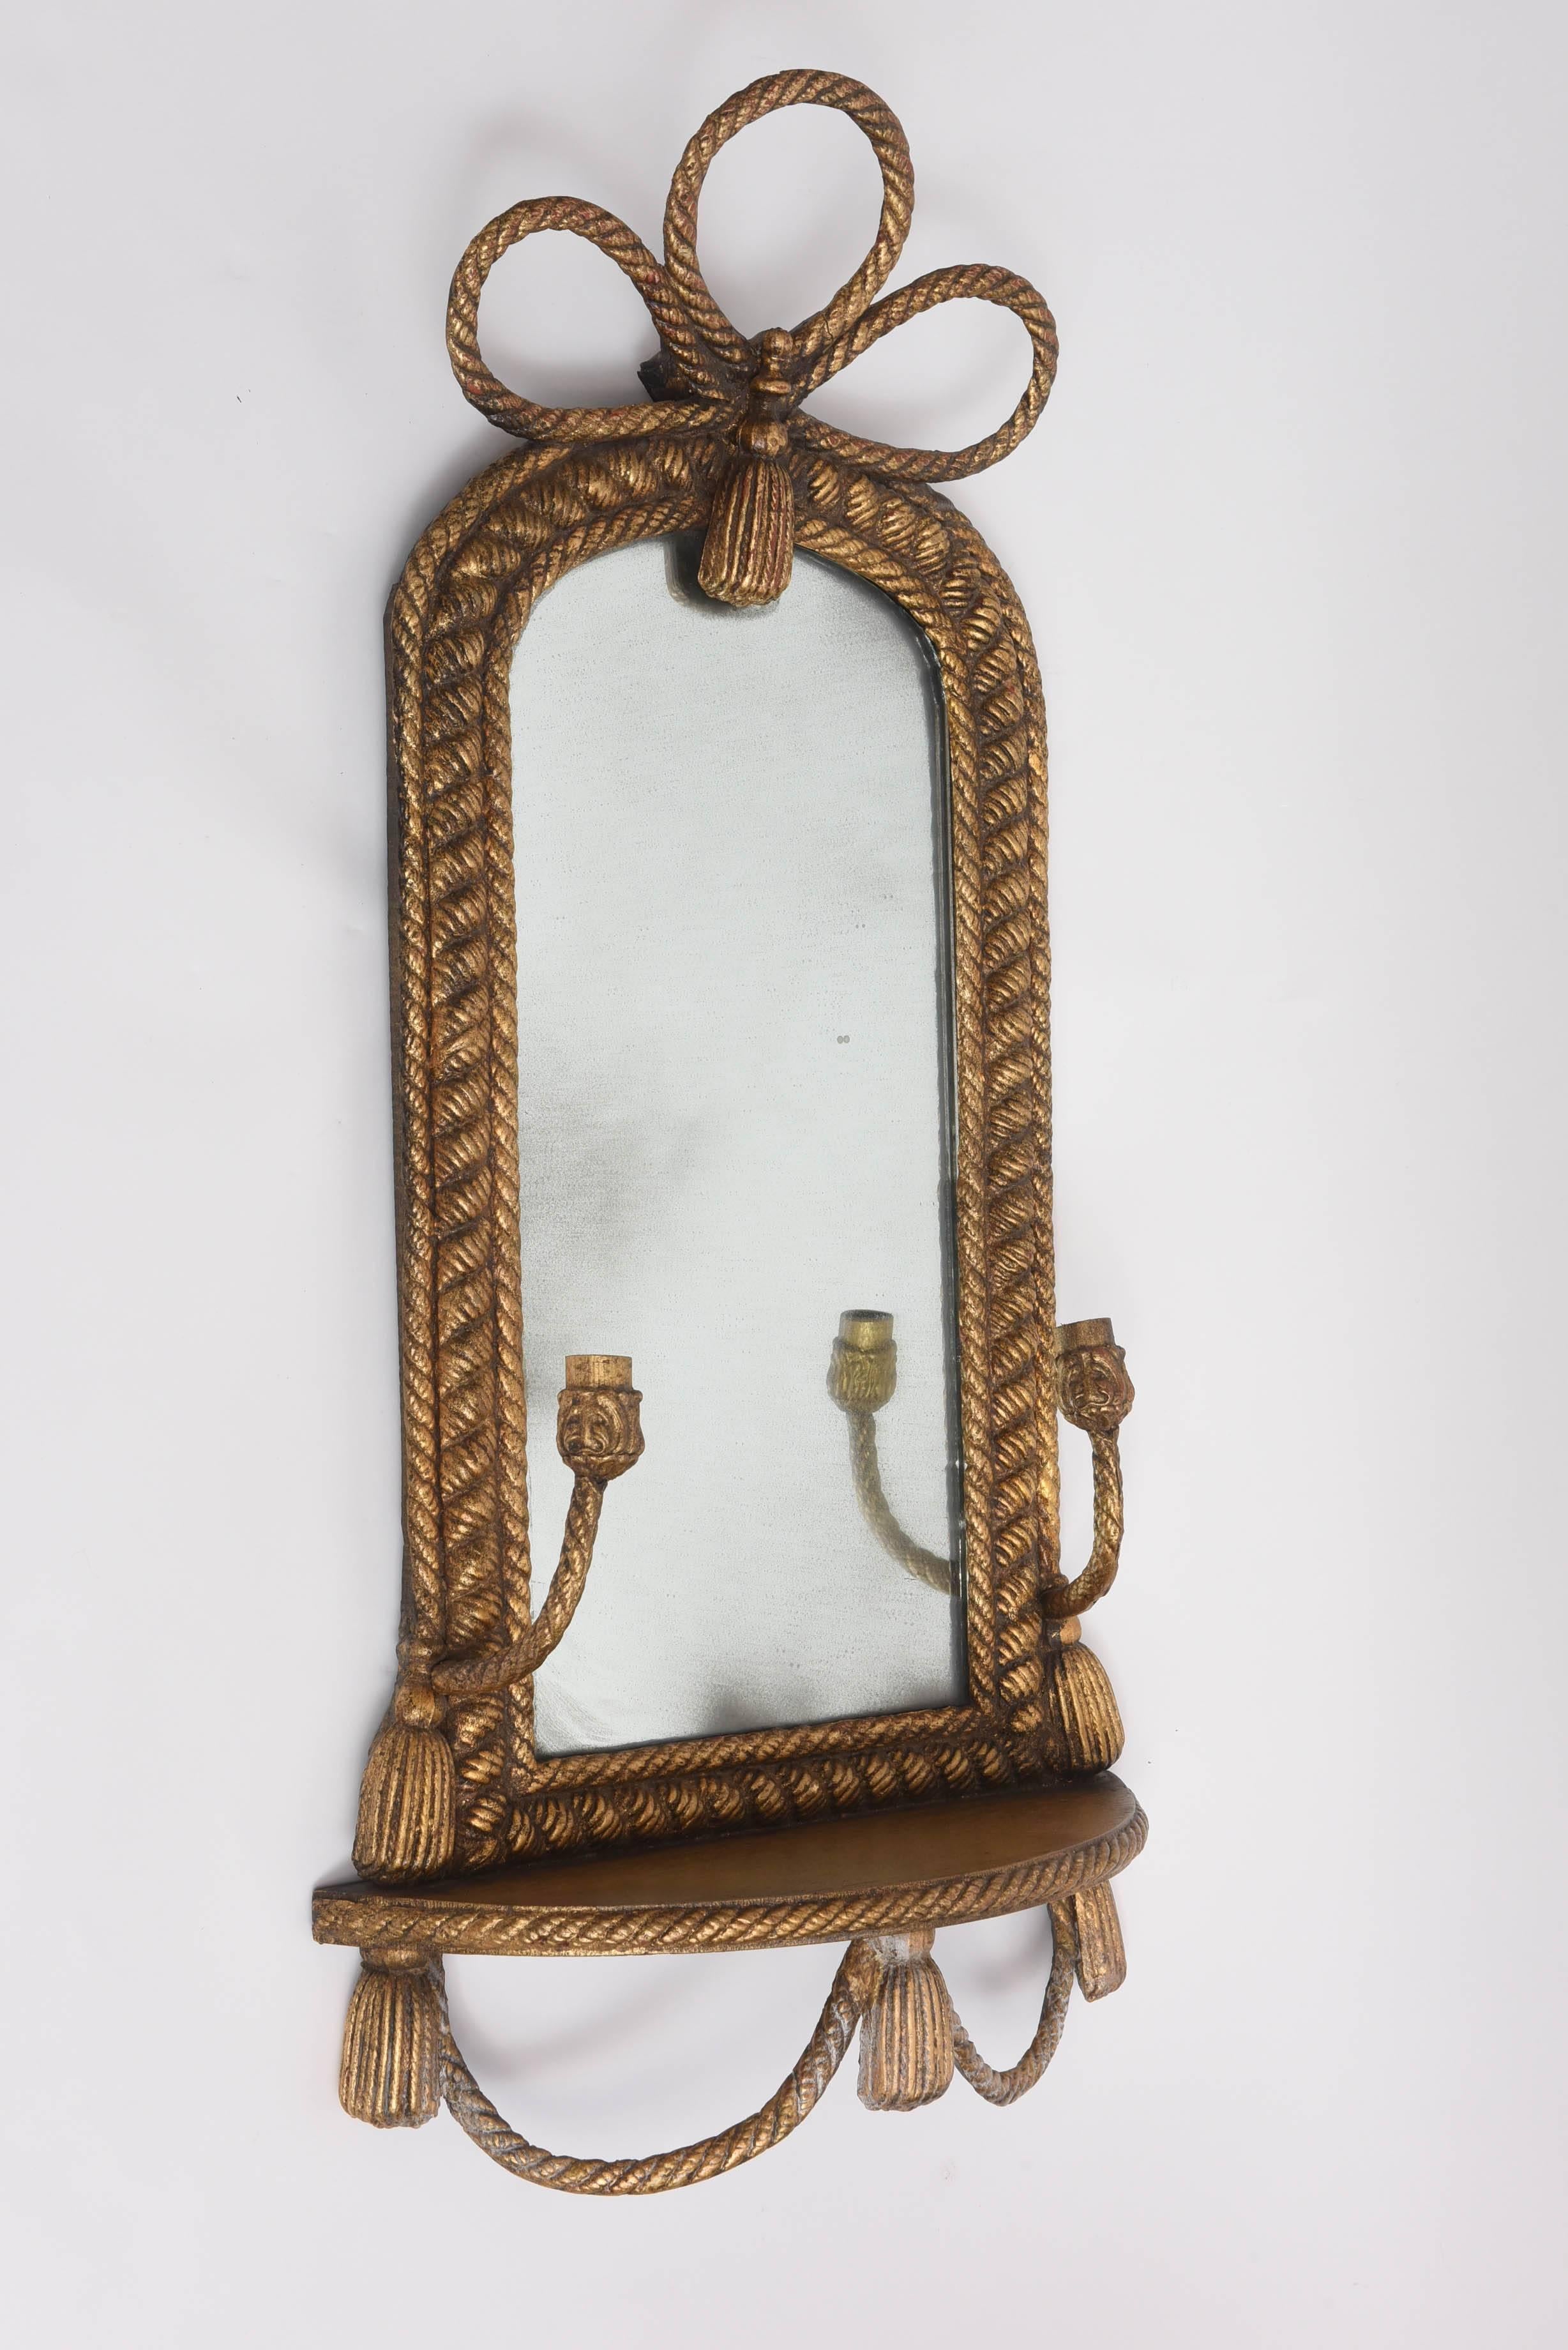 Interesting pair of wall hanging mirrors with shelves and candle holders. Graced by a rope and tasseled motif.